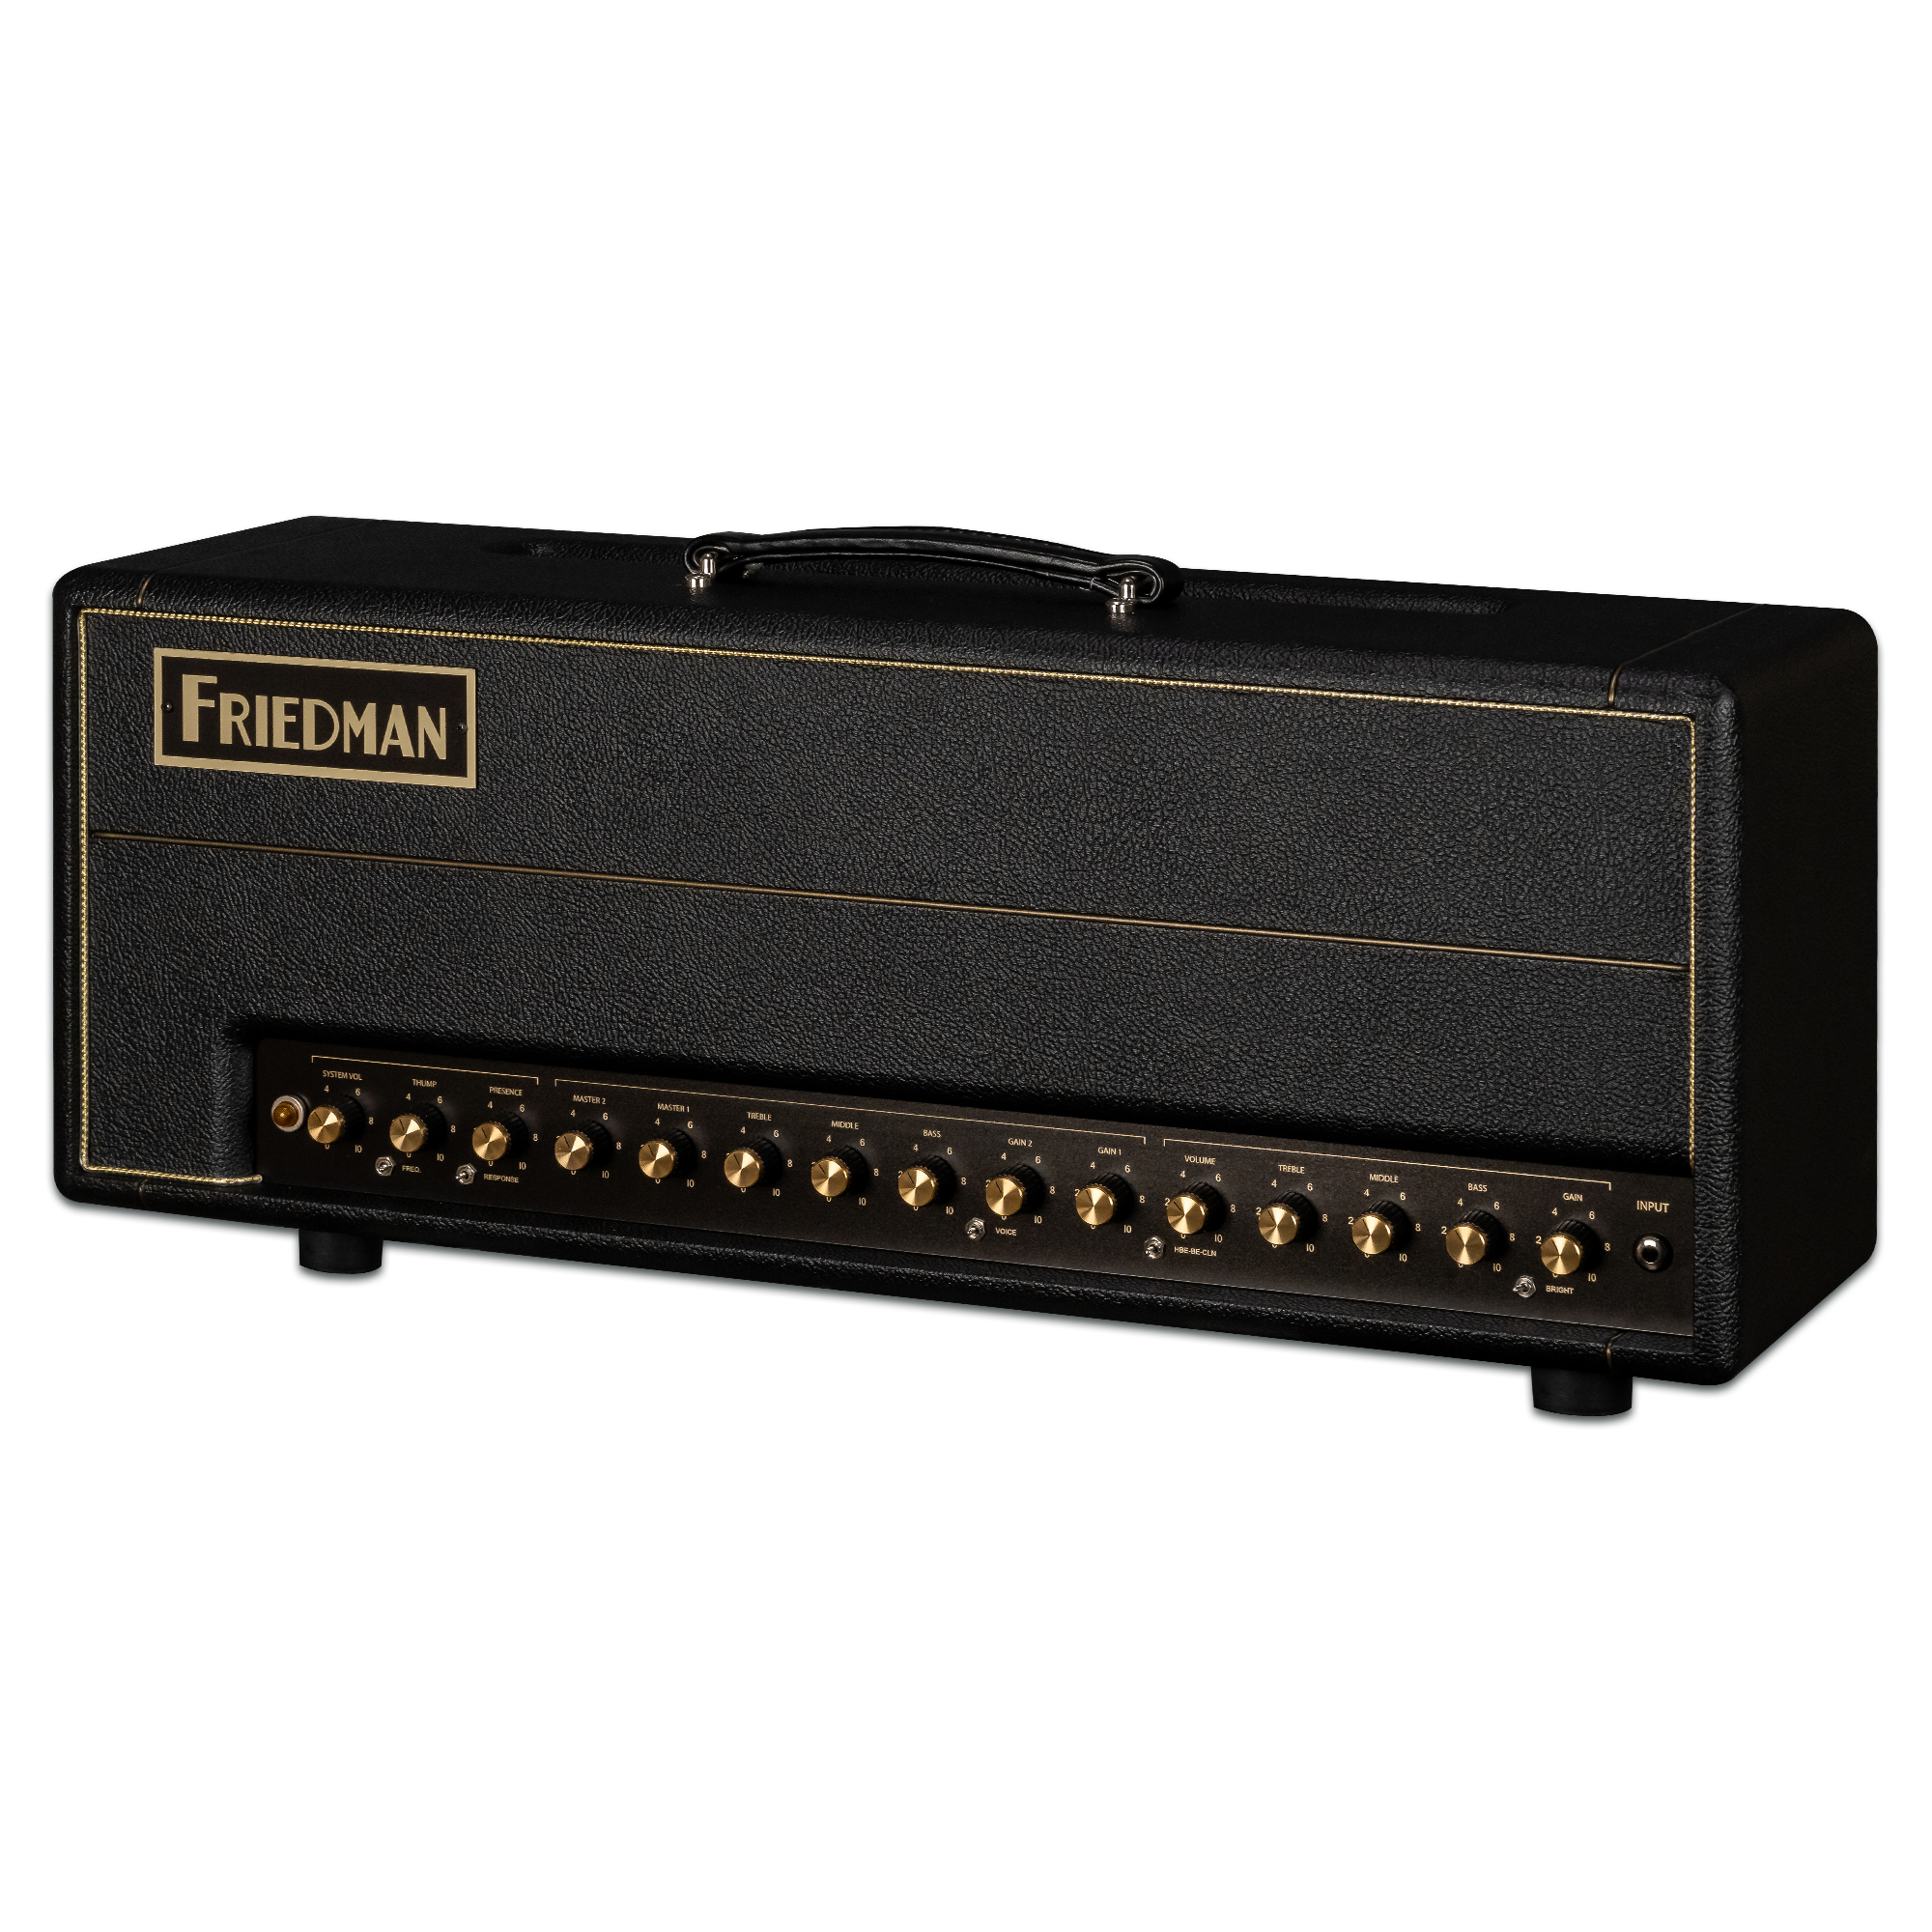 Friedman Amplification Be-100 Deluxe Head 100w - Electric guitar amp head - Variation 2